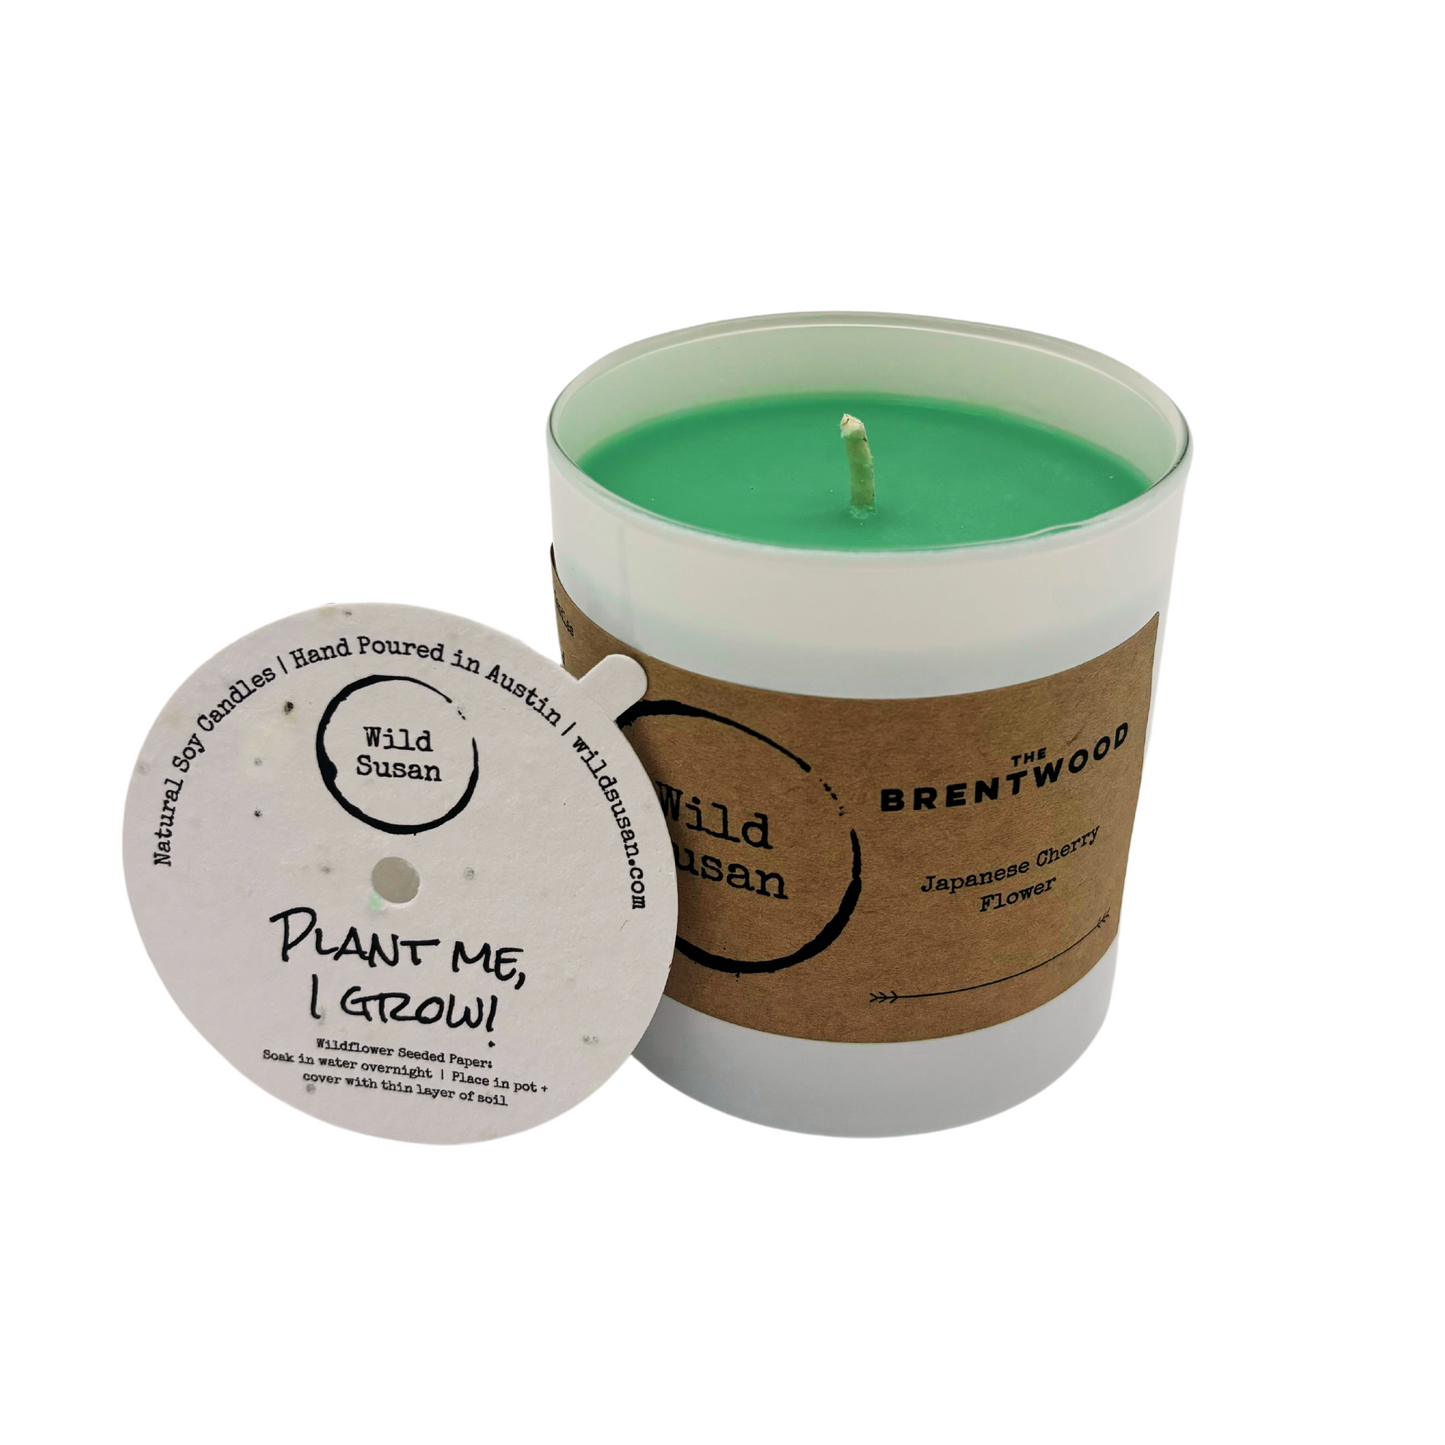 Brentwood [Japanese Cherry Flower] Soy Candle/Wax Melt